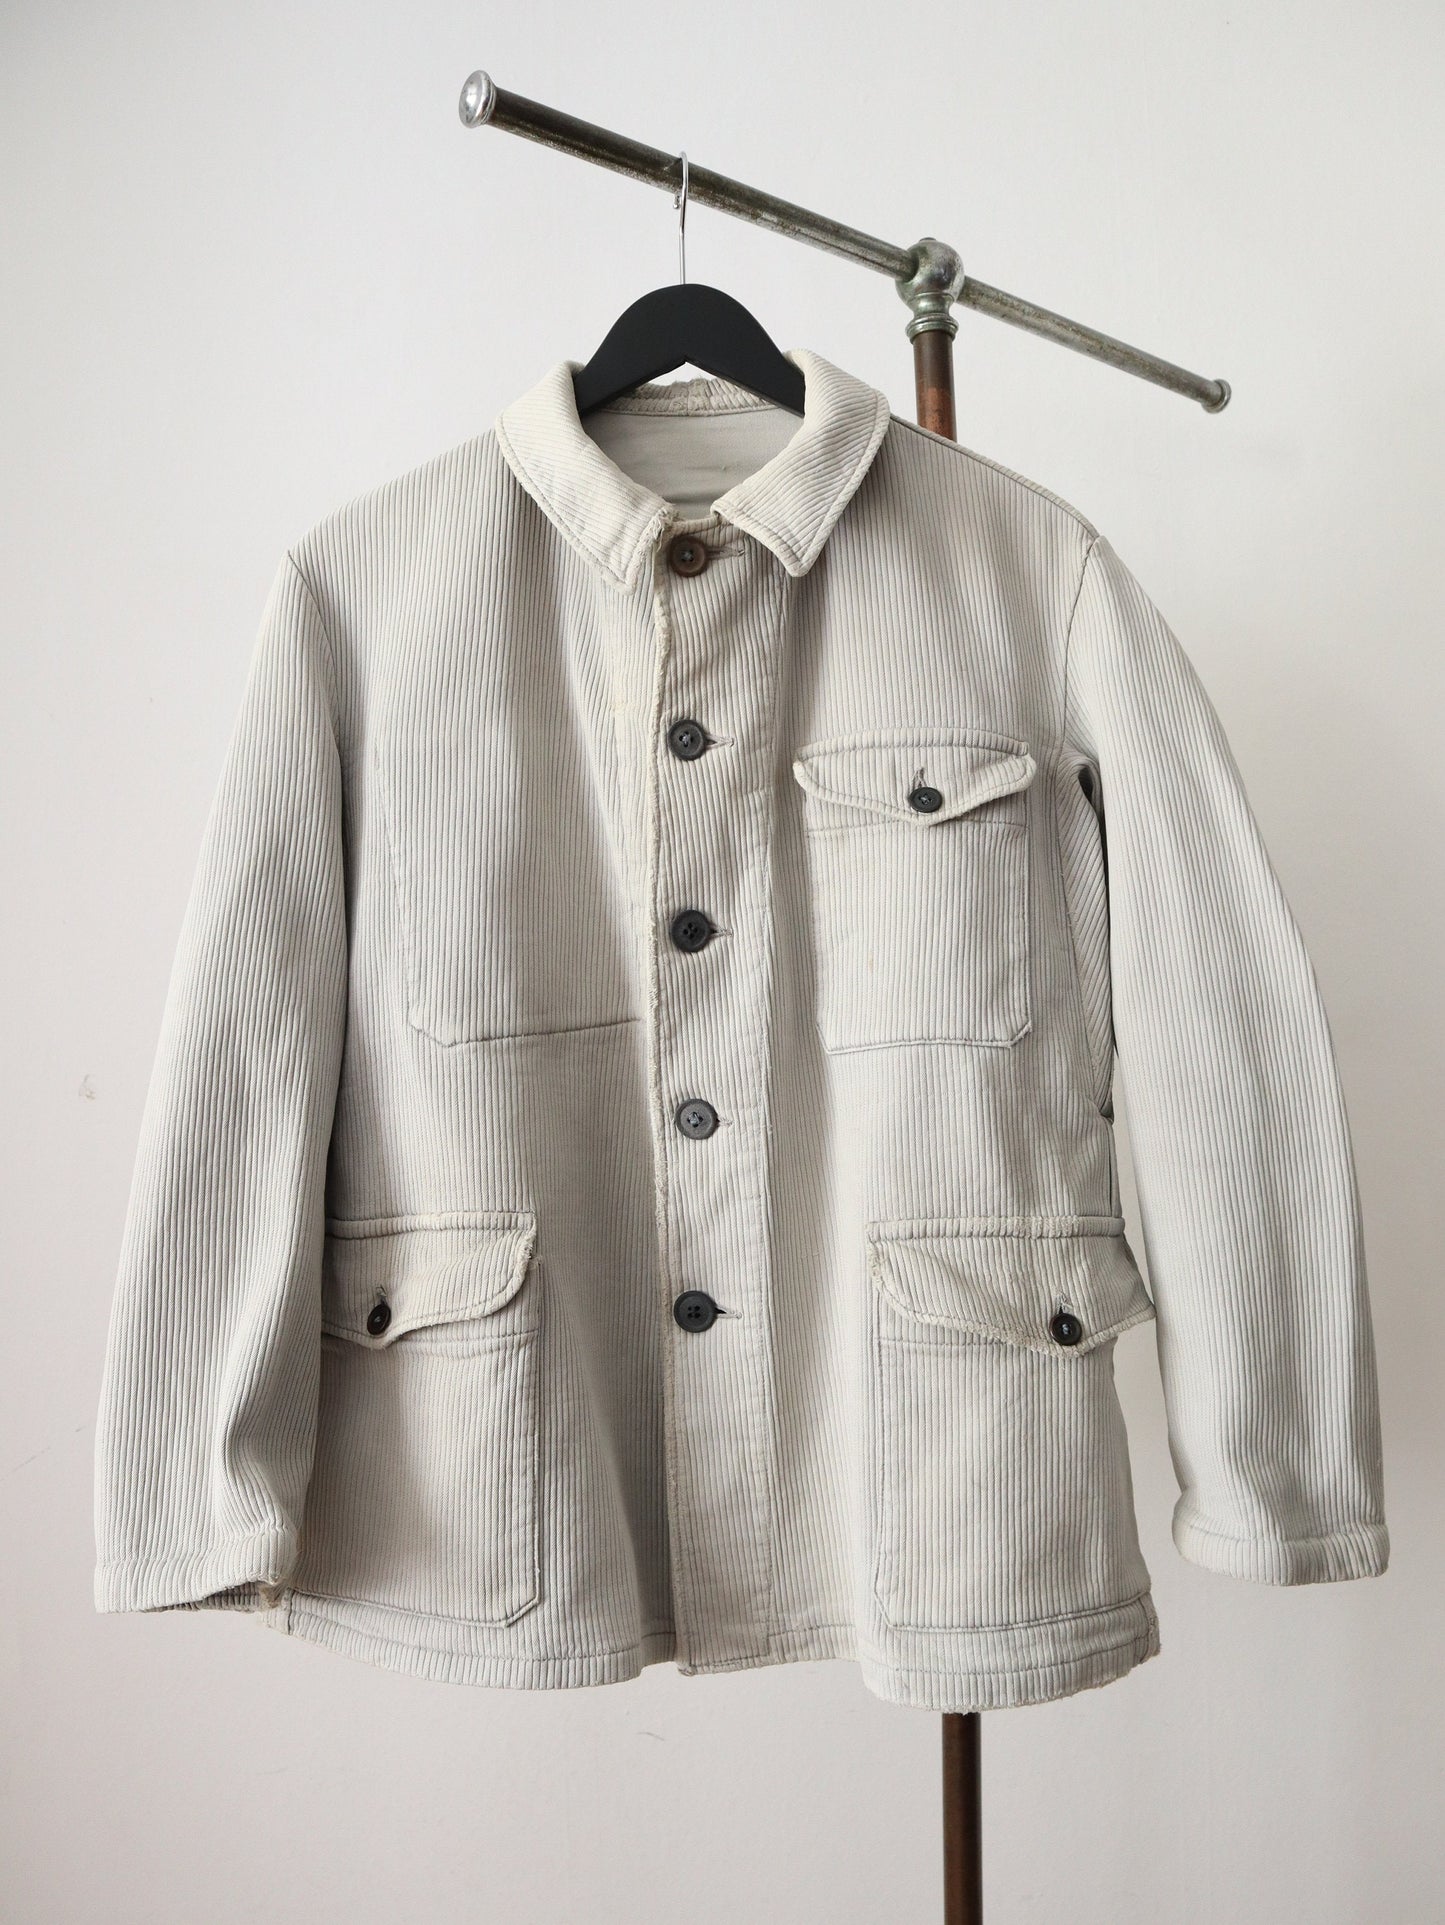 1930s French Hunting Jacket Light Grey Worn Mended Repaired Chore Workwear Early Vintage Metal Animal Buttons